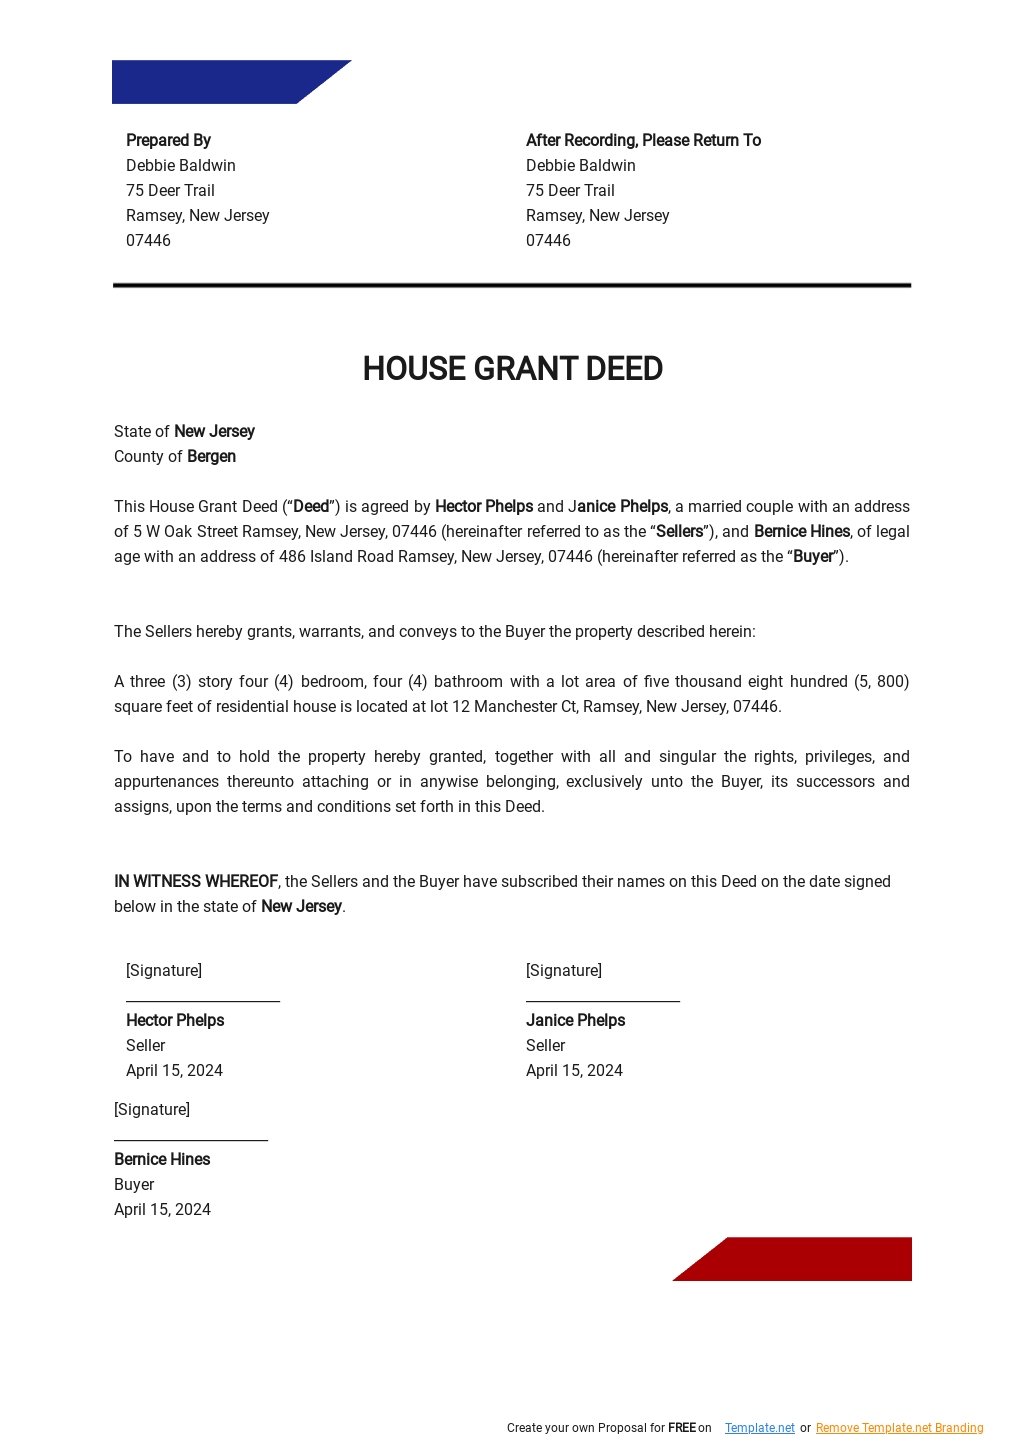 House Grant Deed Template 